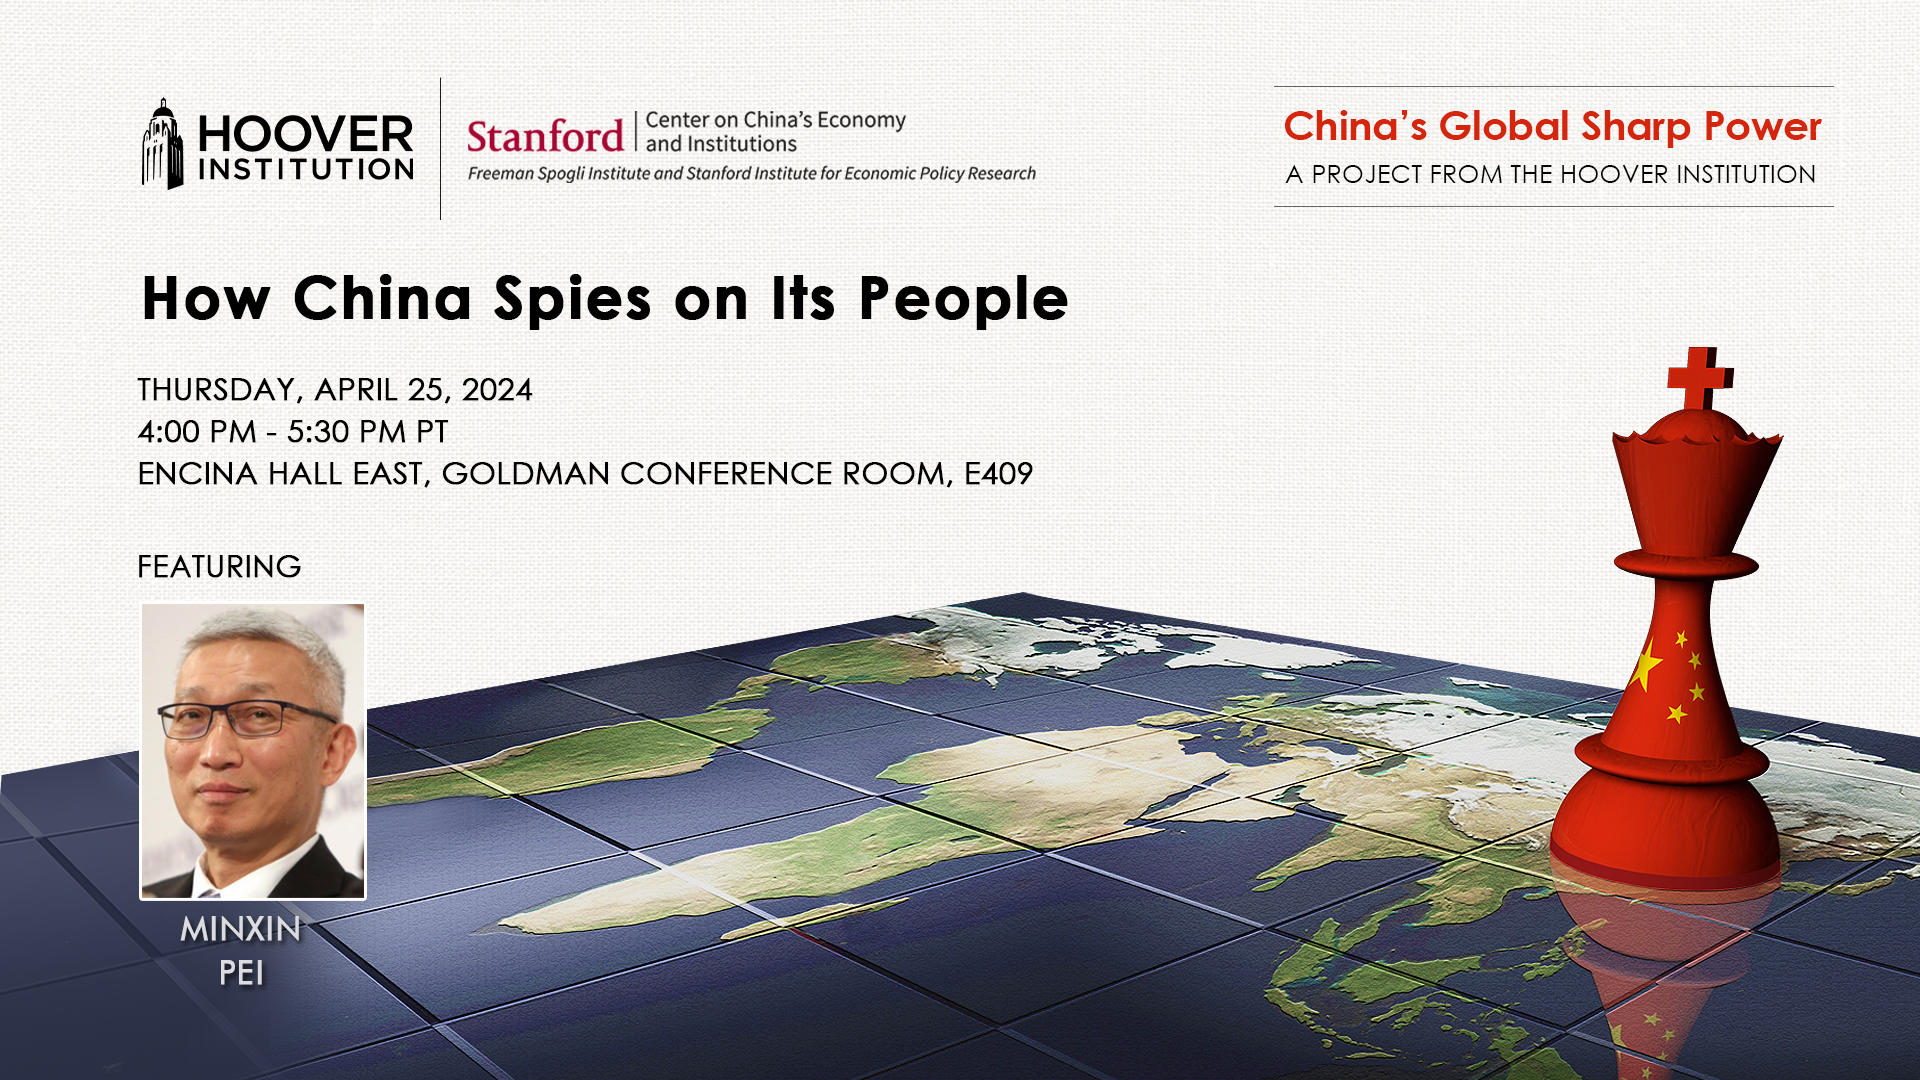 How Does China Spy on Its People?